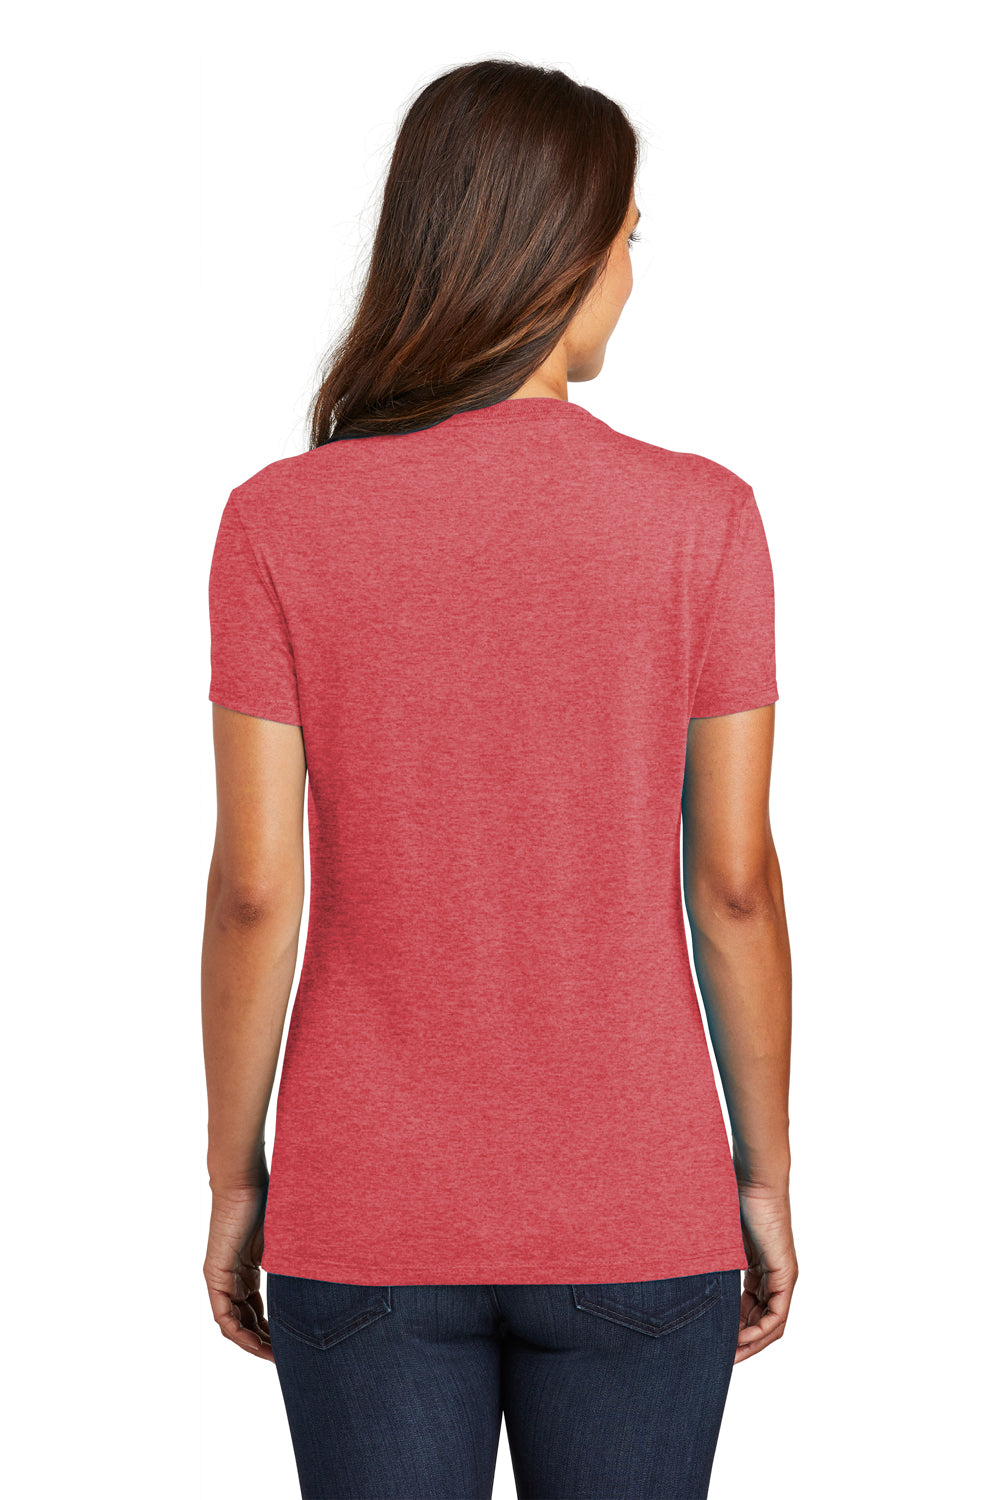 District DM130L Womens Perfect Tri Short Sleeve Crewneck T-Shirt Red Frost Back